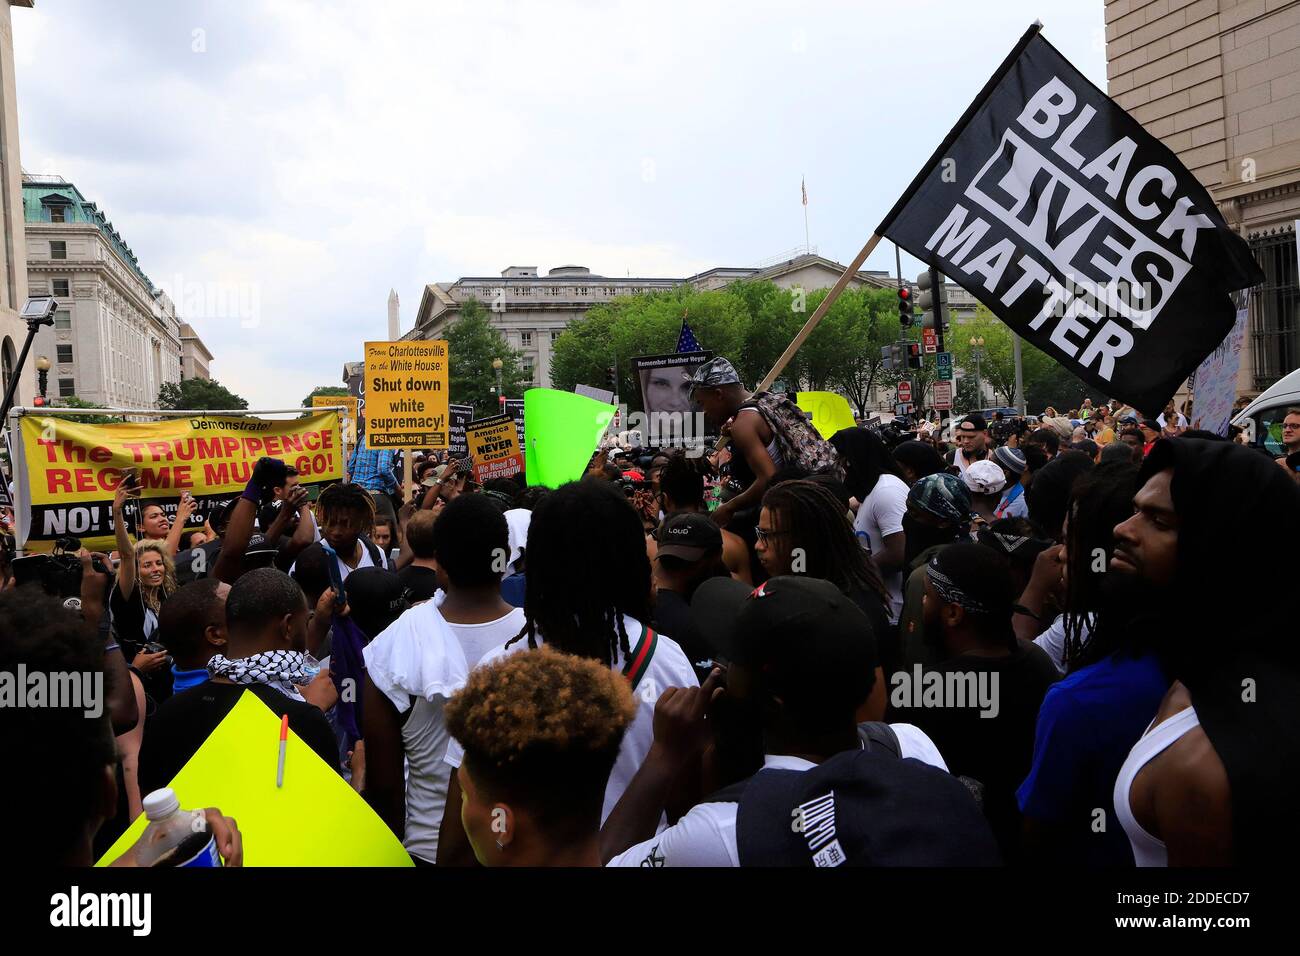 NO FILM, NO VIDEO, NO TV, NO DOCUMENTARY - Curtis Aiken waves a Black Lives Matter flag with an image of Heather Heyer in the background during a march in Washington, D.C. on Sunday, Aug. 12, 2018 ahead of a white nationalist rally to take place near the White House. The rally was planned on the anniversary of the Unite the Right rally, organized by the same people, in Charlottesville, Va. where Heyer was killed. Photo by Darryl Smith/TNS/ABACAPRESS.COM Stock Photo